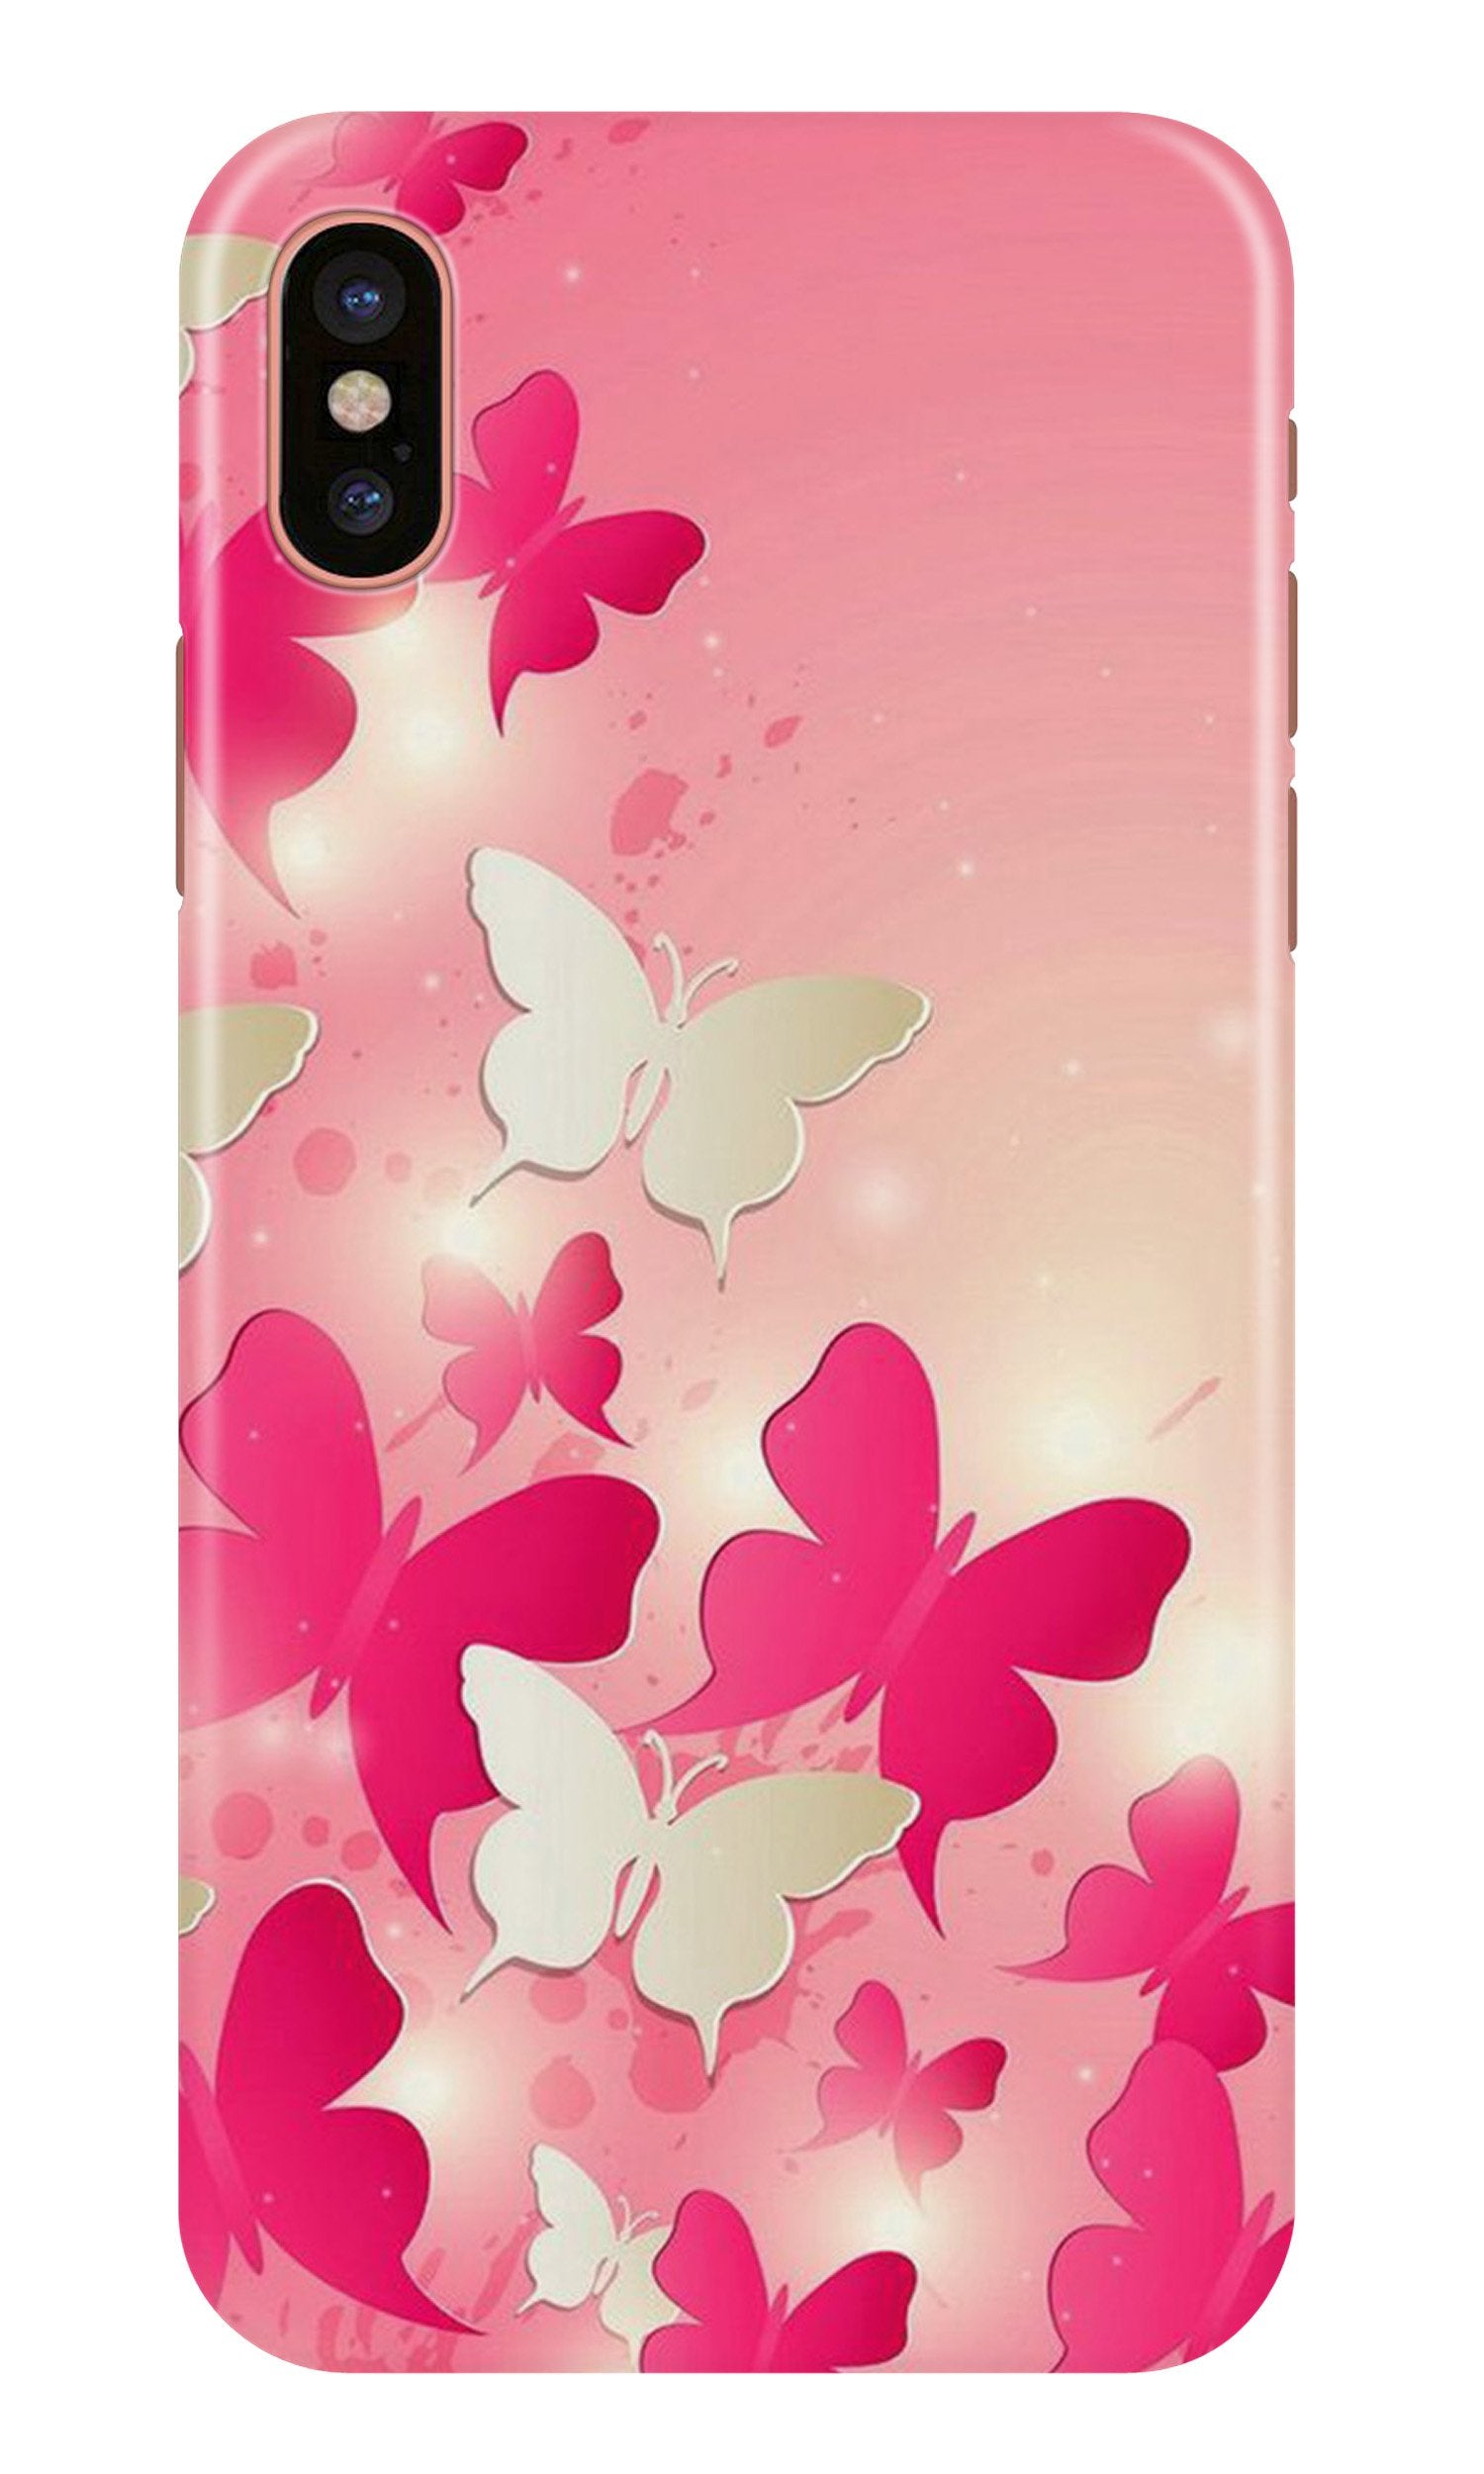 White Pick Butterflies Case for iPhone X